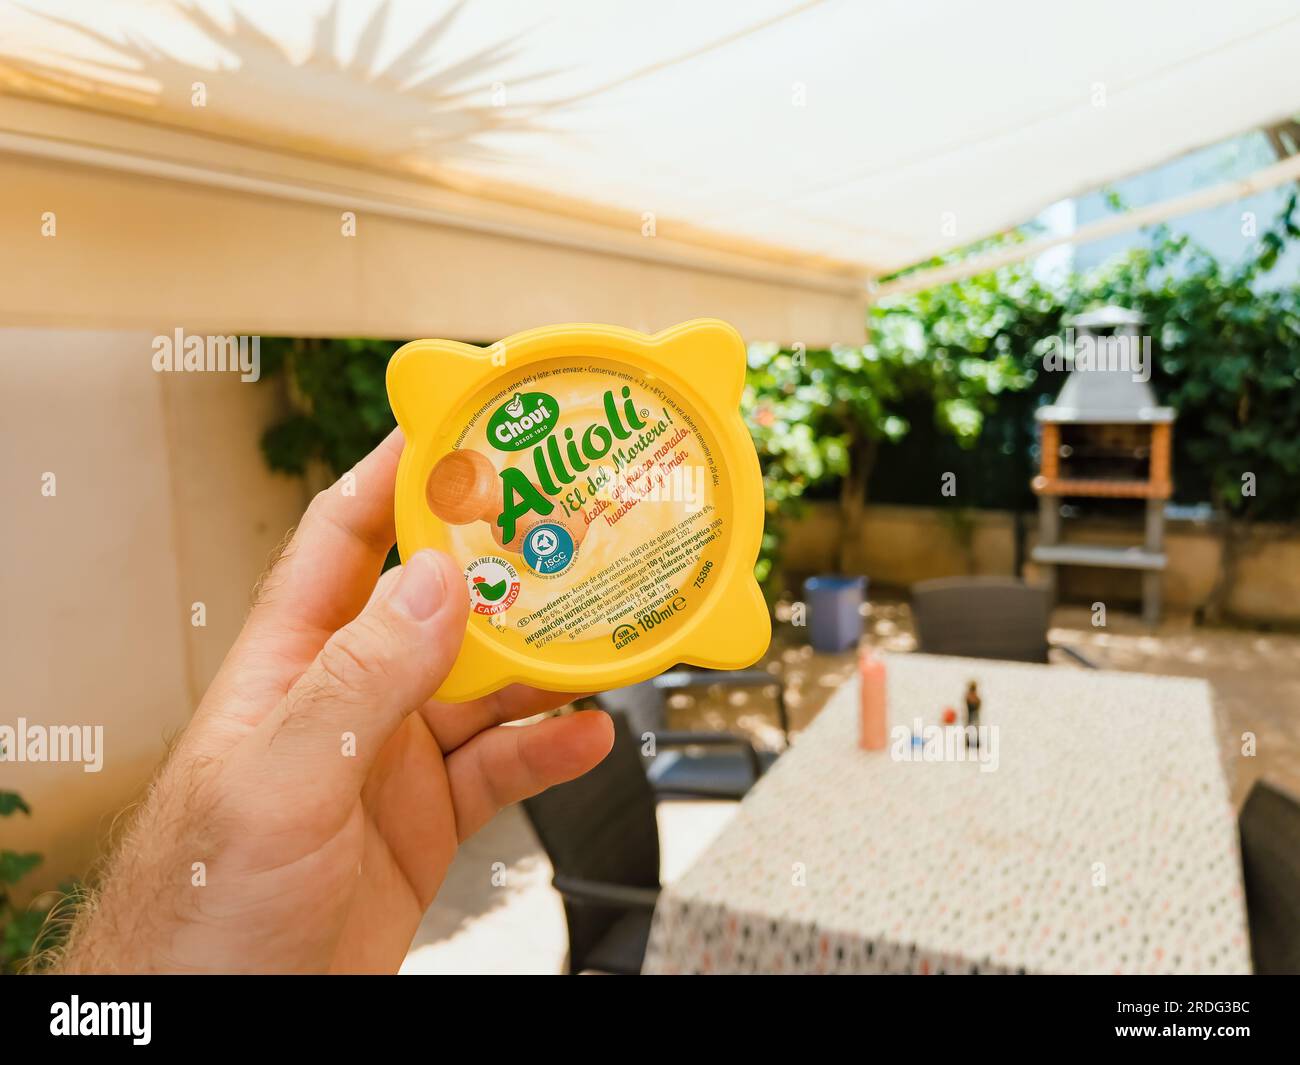 Mallorca, Spain - Jun 30, 2023: A hand holding Chovi brand aioli sauce in yellow plastick package on an outdoor terrace table. Mediterranean flavors in a kitchen setting. Stock Photo